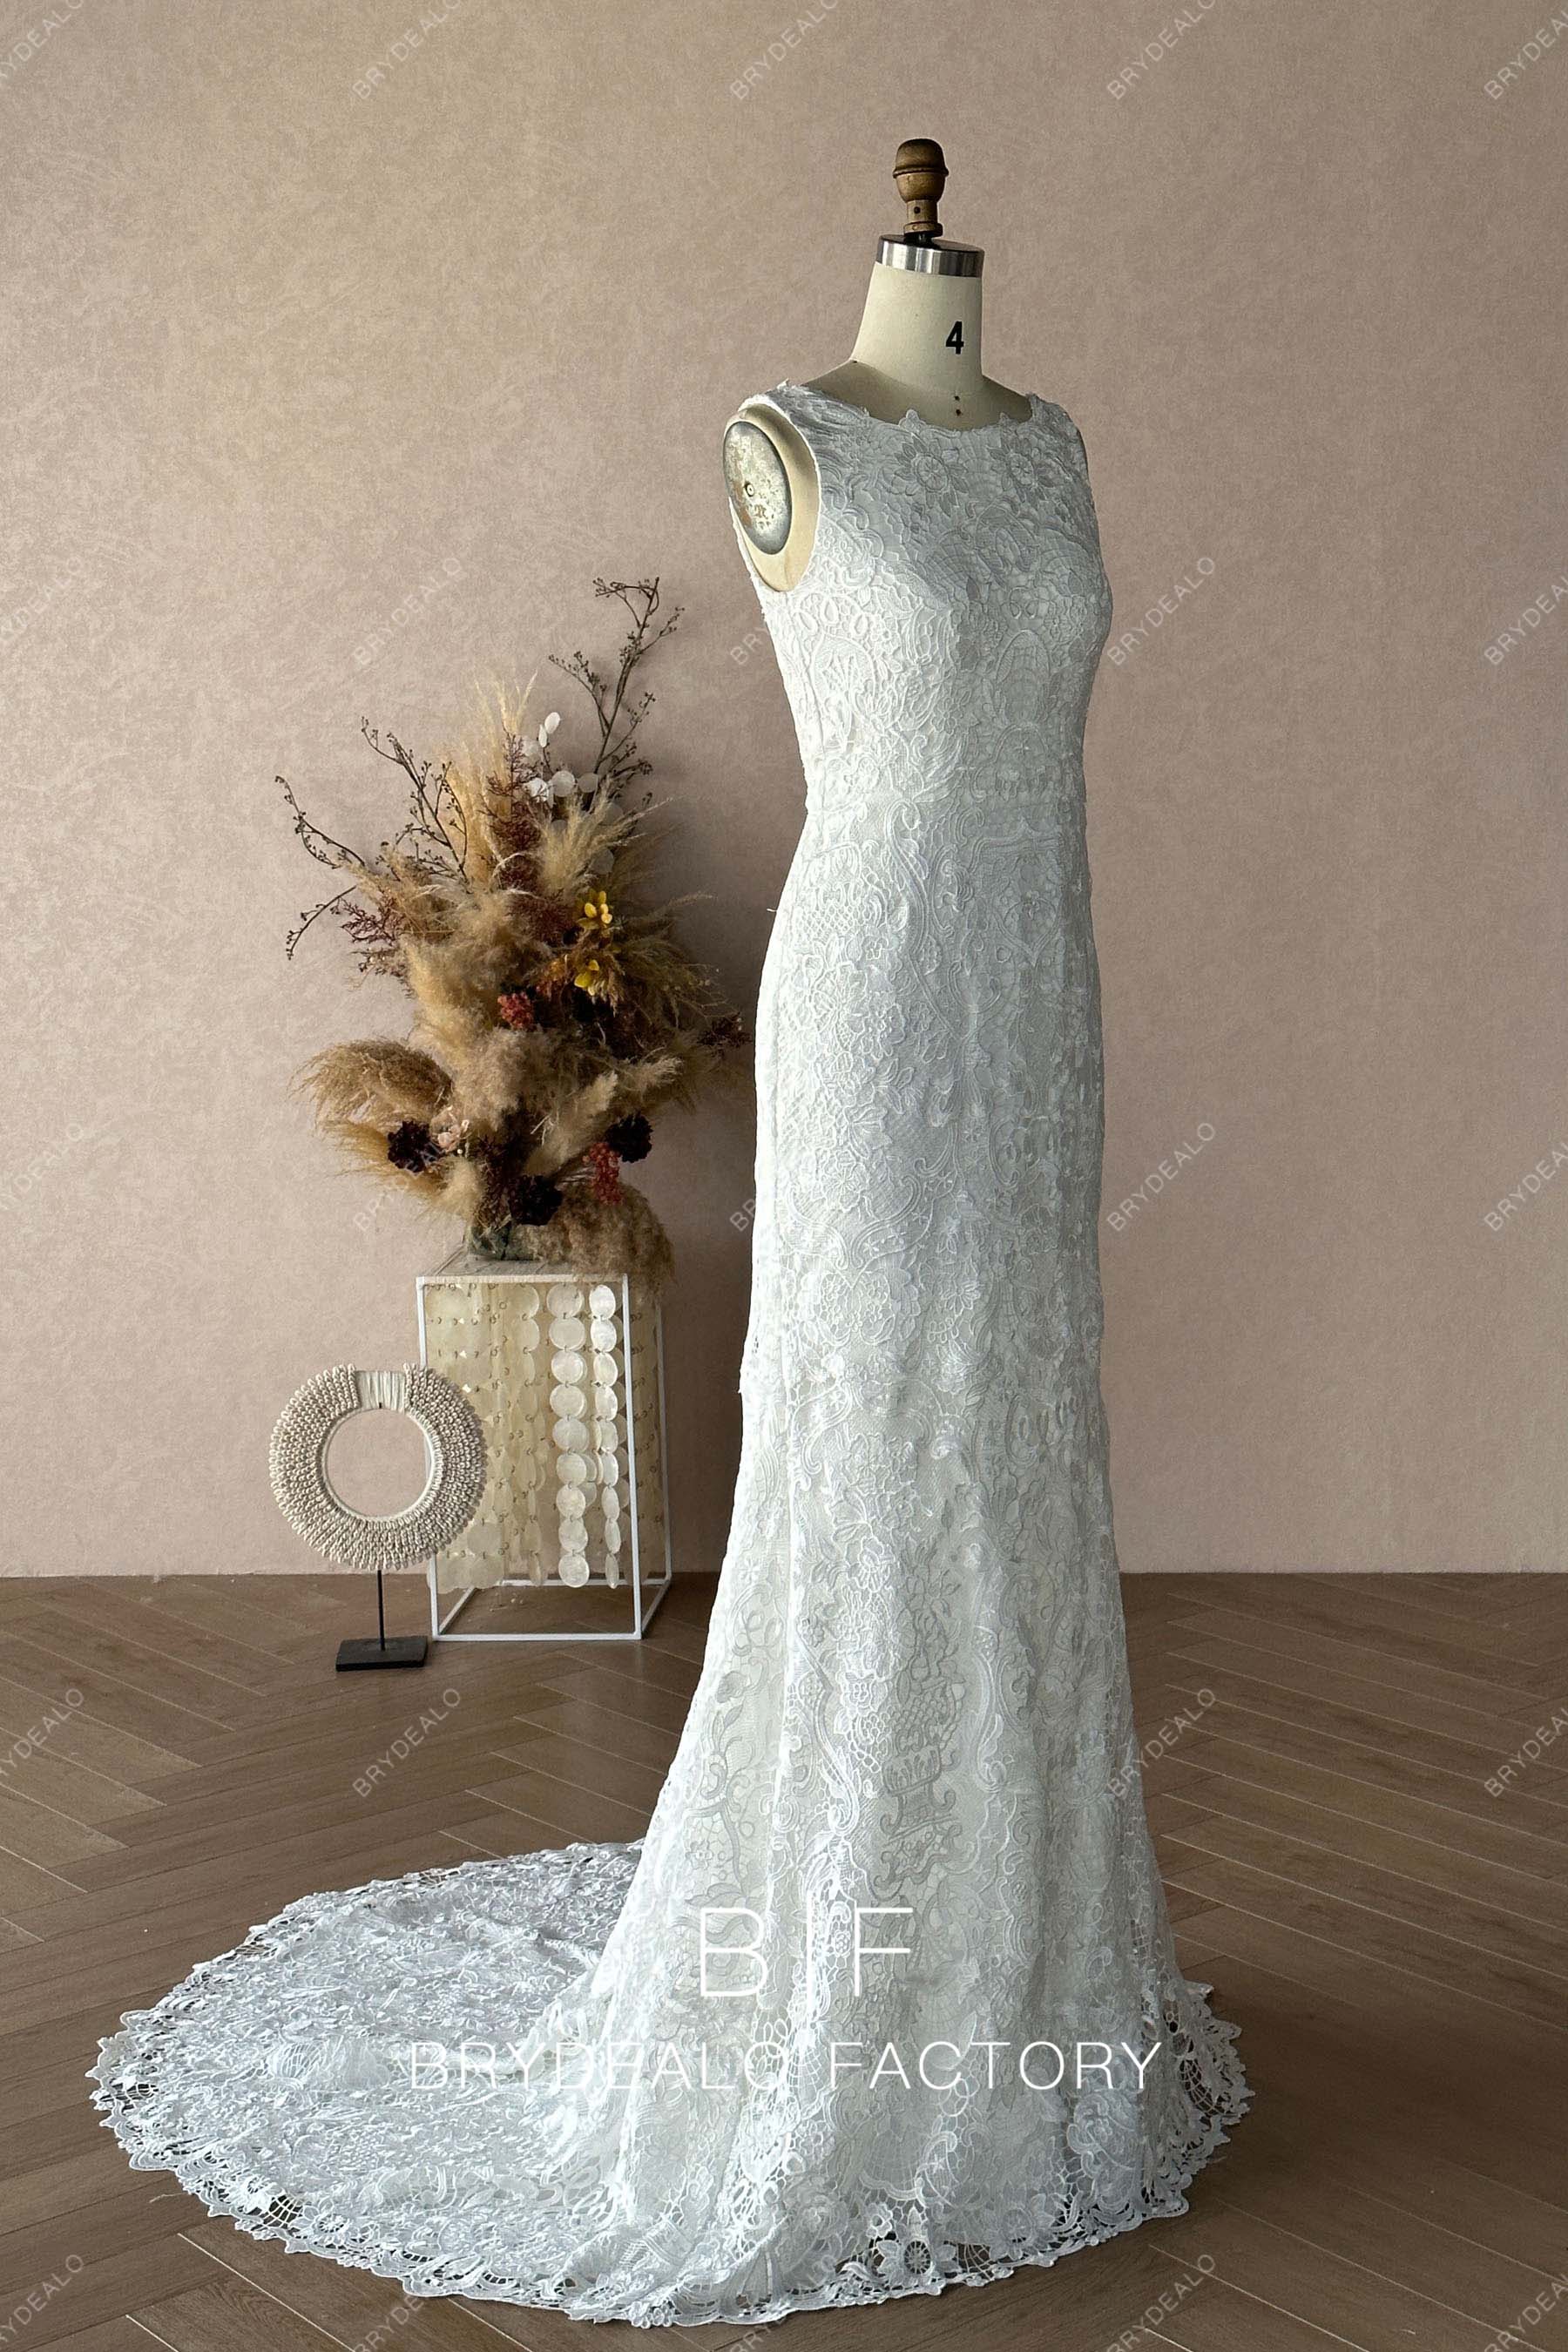 Private Label Sleeveless Lace Bridal Dress